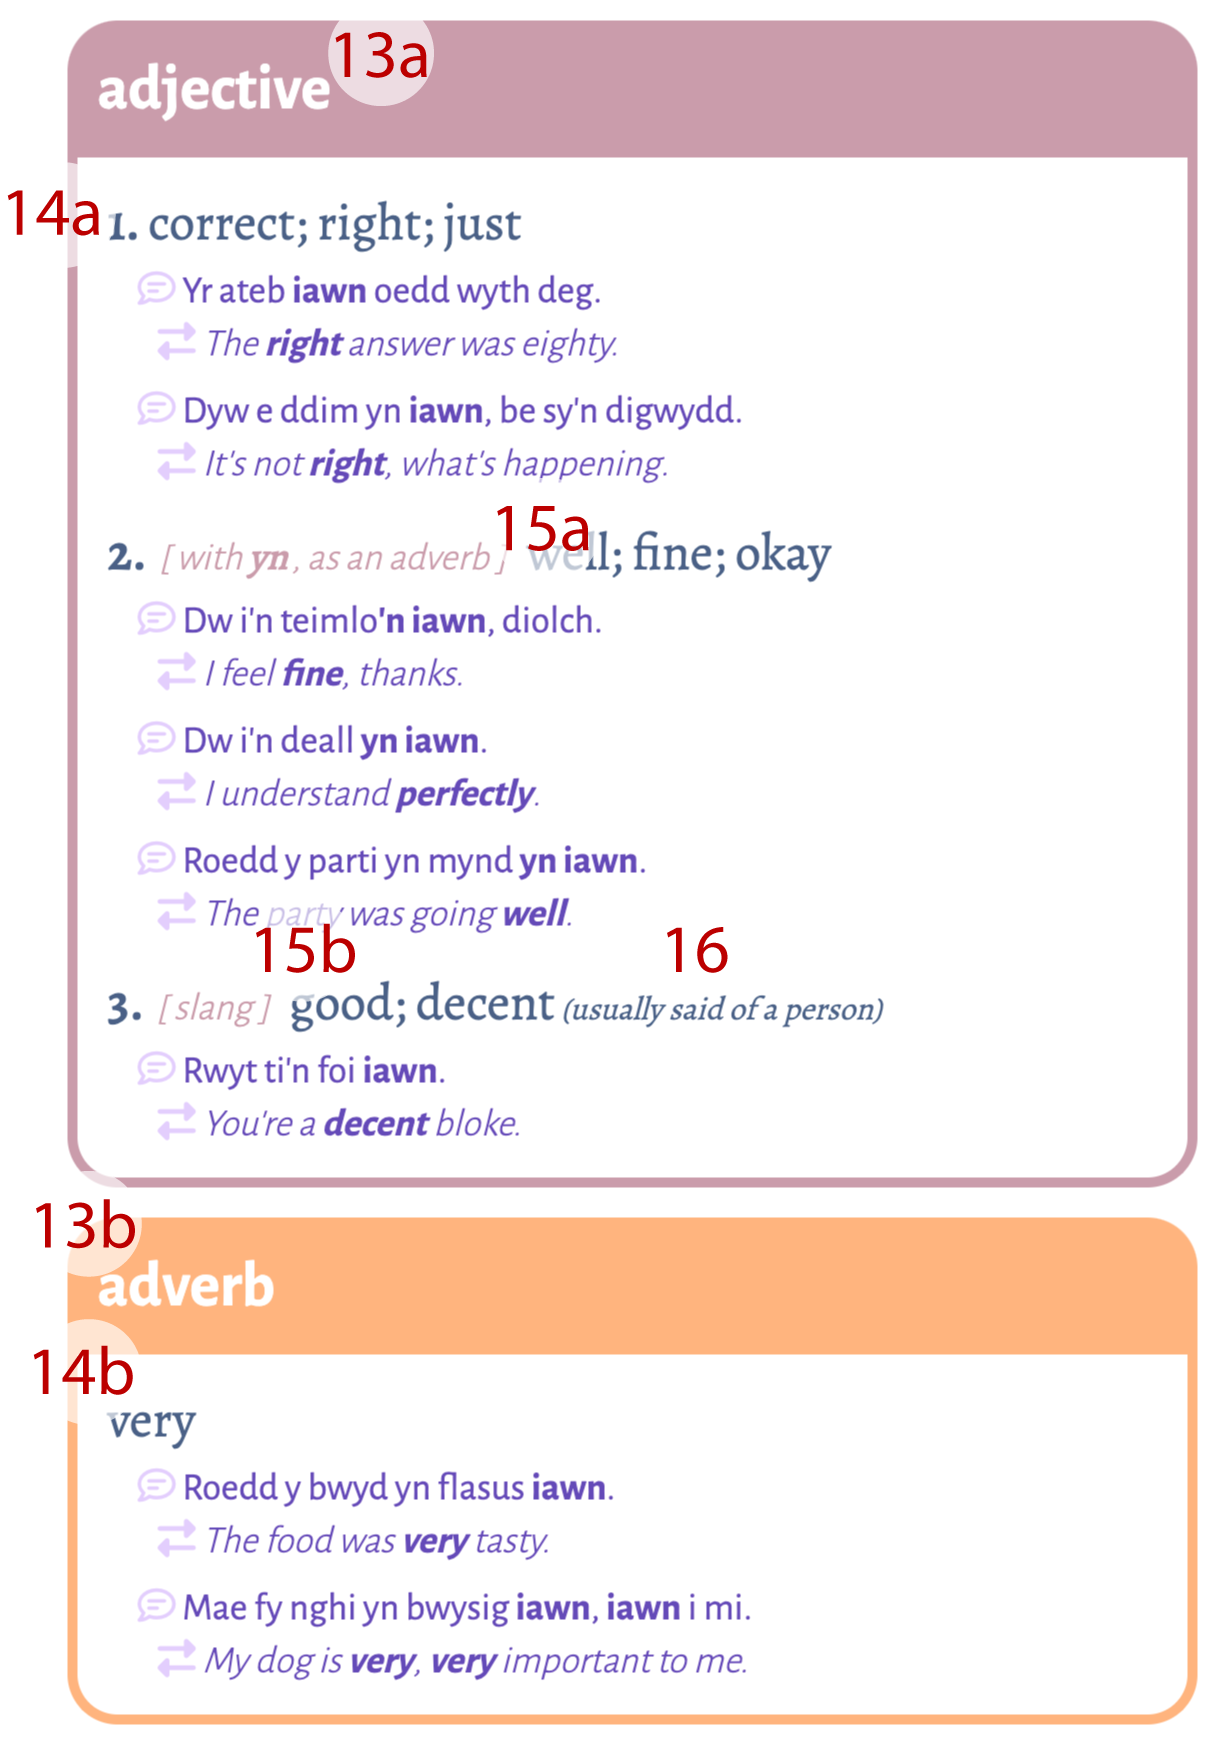 A numbered image of two dictionary senses. The numbered items
    are as follows: 13a - the part of speech label 'adjective'; 13b - the part of speech label
    'adverb'; 14a - a numbered definition; 14b - an unnumbered definition; 15a - a usage label
    preceding a definition explaining how the headword is used in combination with another word; 15b
    - a usage label which reads 'slang'; 16 - a note following the definition, explaining
    the contexts in which this sense occurs.